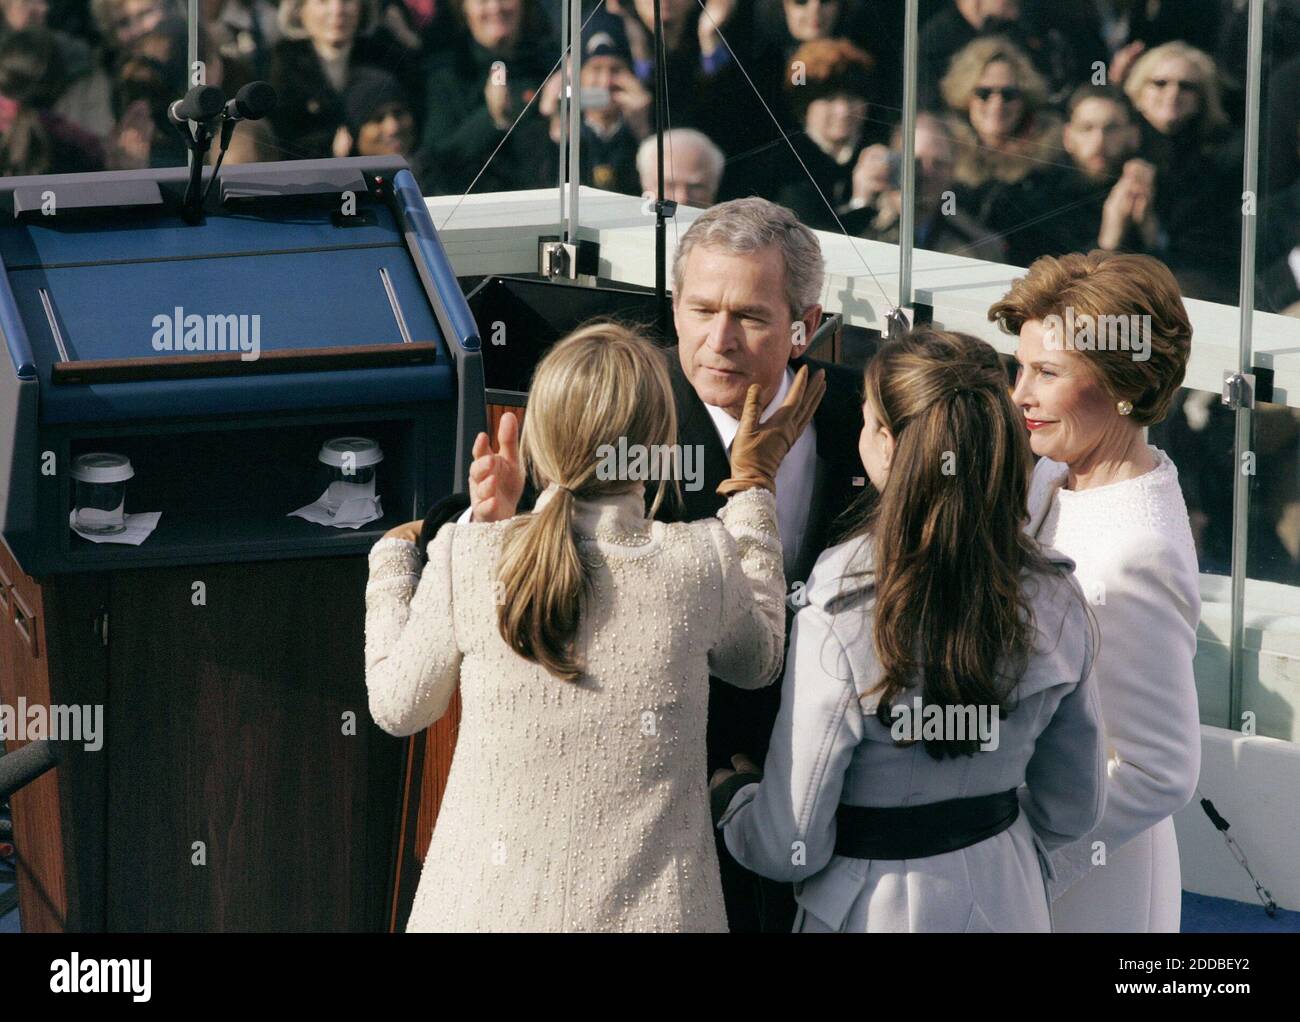 NO FILM, NO VIDEO, NO TV, NO DOCUMENTARY - U.S. President George W. Bush kisses his daughter Jenna, left, during Inauguration ceremonies on Capitol Hill in Washington, January 20, 2005, as First Lady Laura Bush, right looks on with daughter Barbara, second from left. Washington, DC, USA, on January 20, 2005. Photo by Chuck Kennedy/US News Story Slugged/KRT/ABACA. Stock Photo